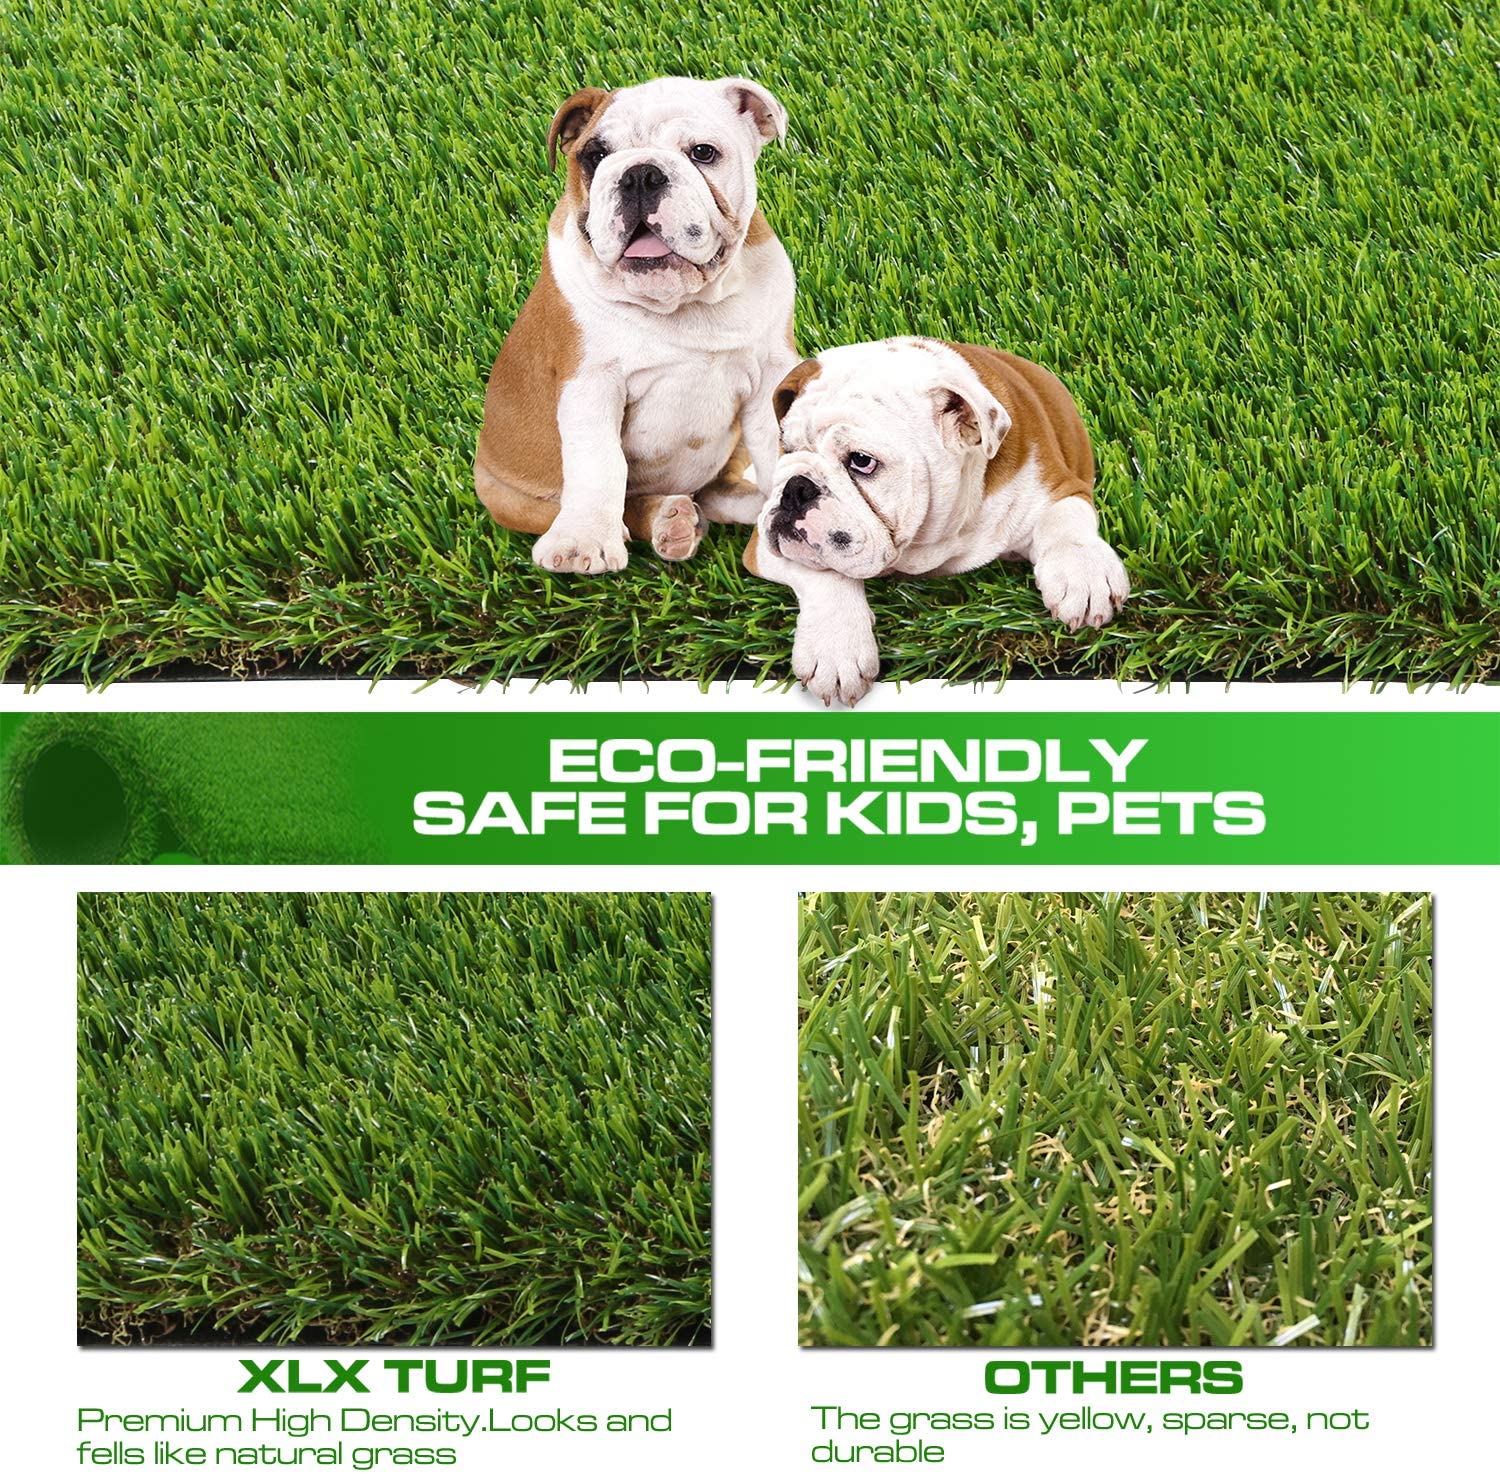  XLX TURF Realistic Artificial Grass Rug Indoor Outdoor - 3ft x 5ft, Thick Synthetic Fake Grass Dog Pet Turf Mat for Garden Lawn Landscape